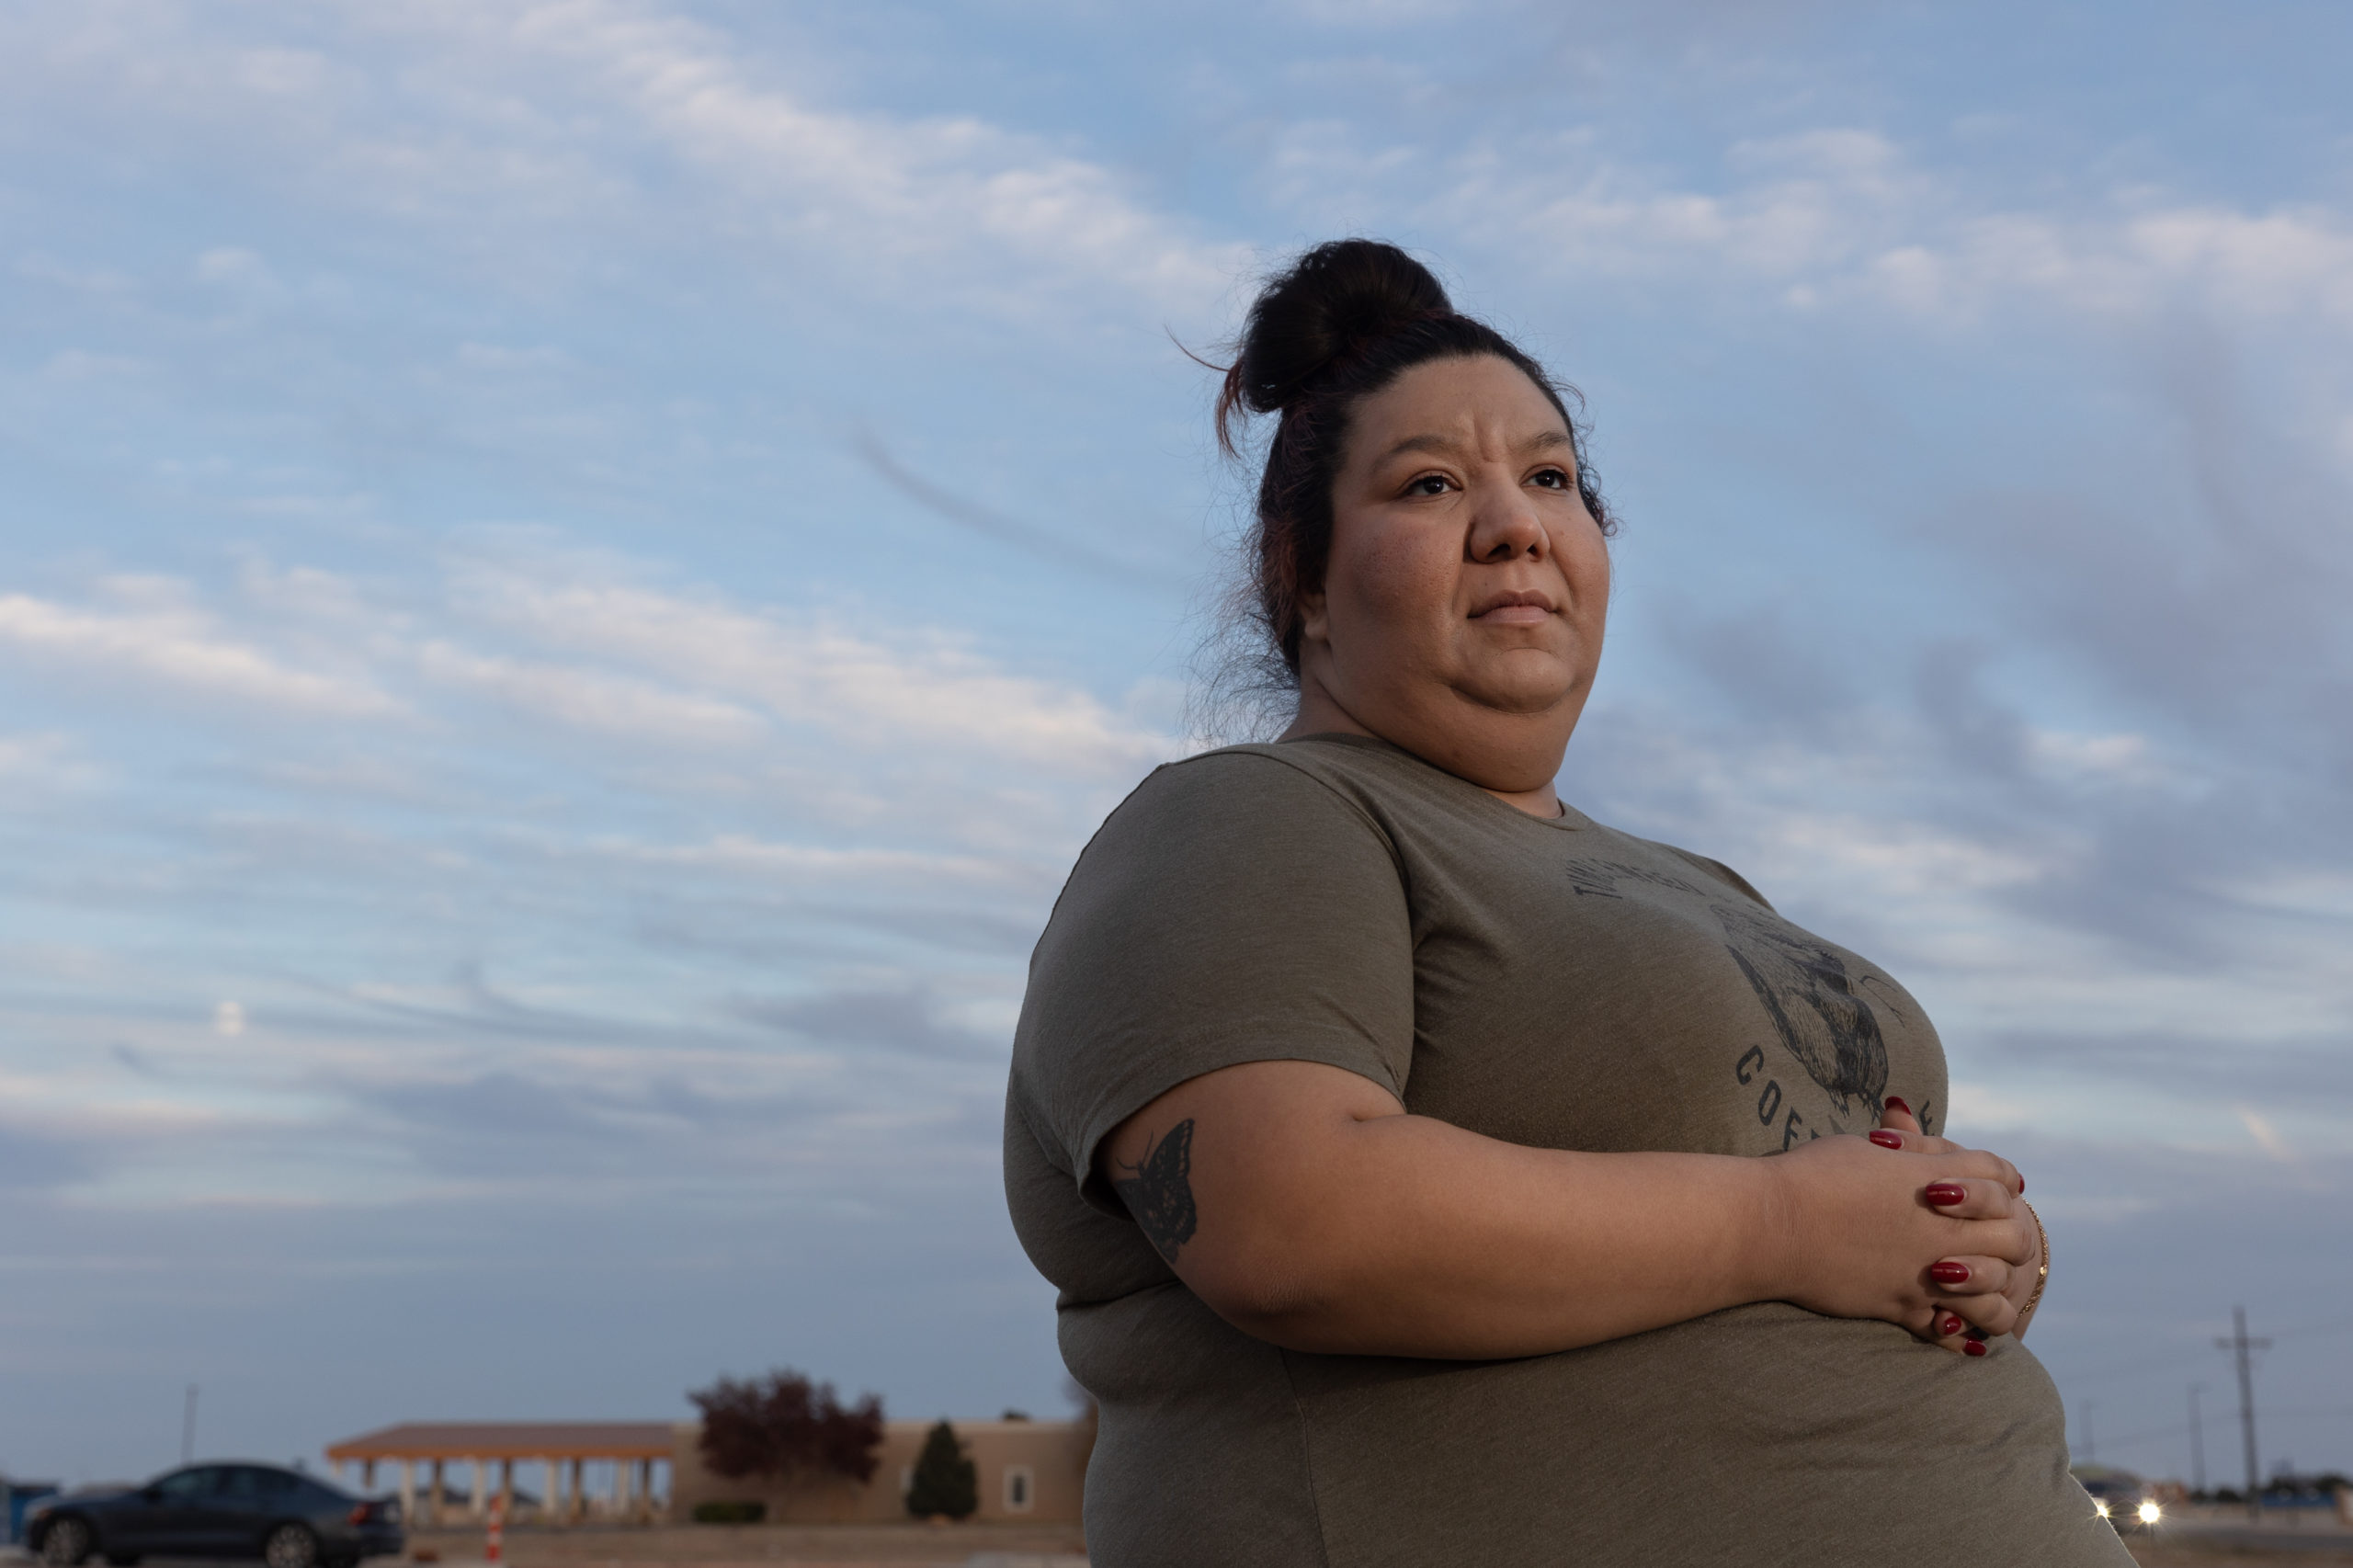 Destiny Adams stands for a portrait outside of her shop, Tumbleweed + Sage Coffeehouse, in Wolfforth, TX on December 7, 2022. She's wearing a Tumbleweed + Sage t-shirt, which shows a beaver chewing on a branch, and the sky is a speckled with moody clouds behind her.